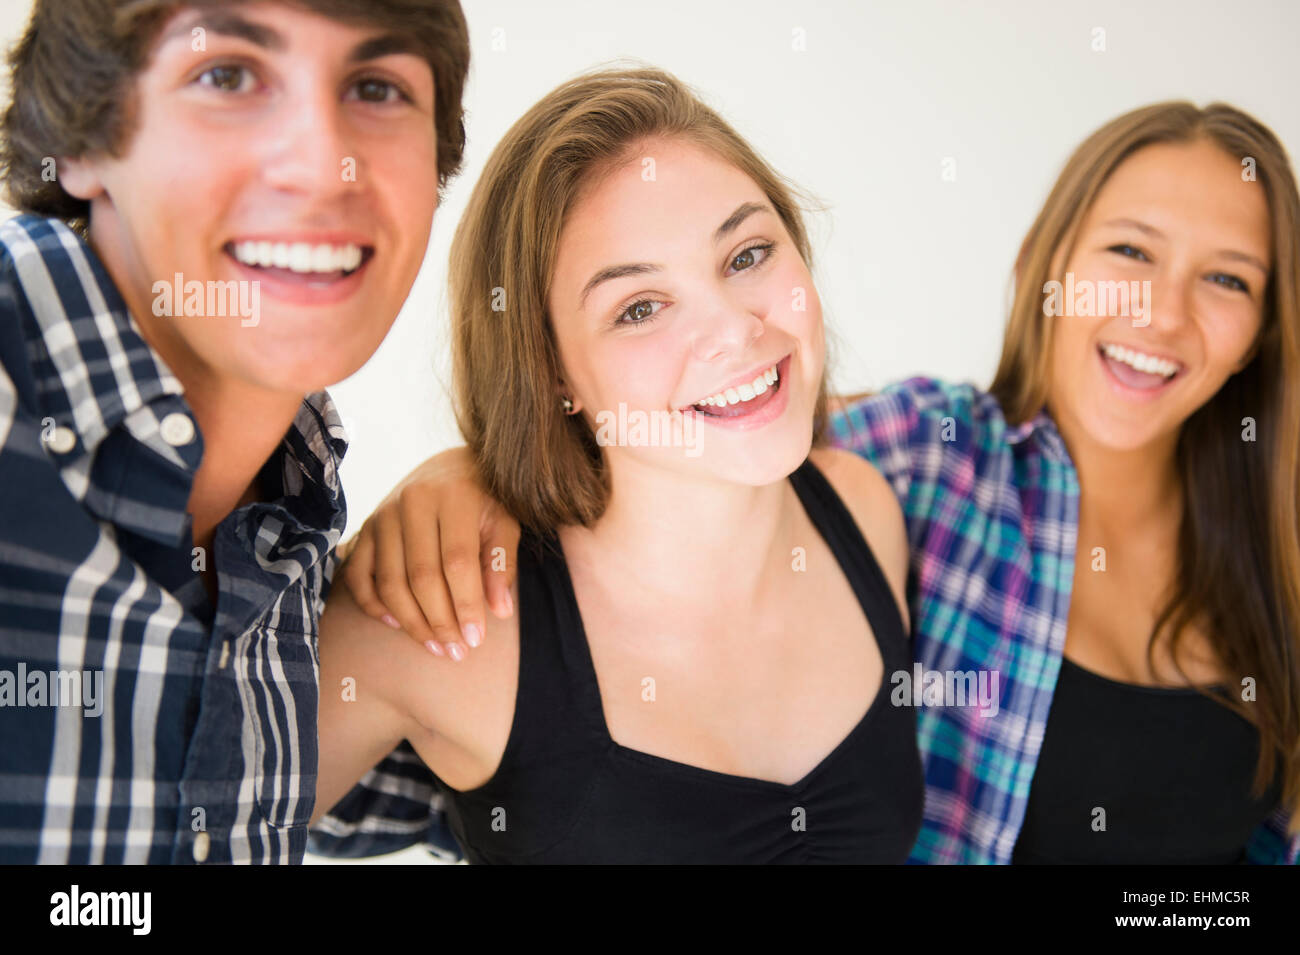 Teenagers hugging and smiling Stock Photo